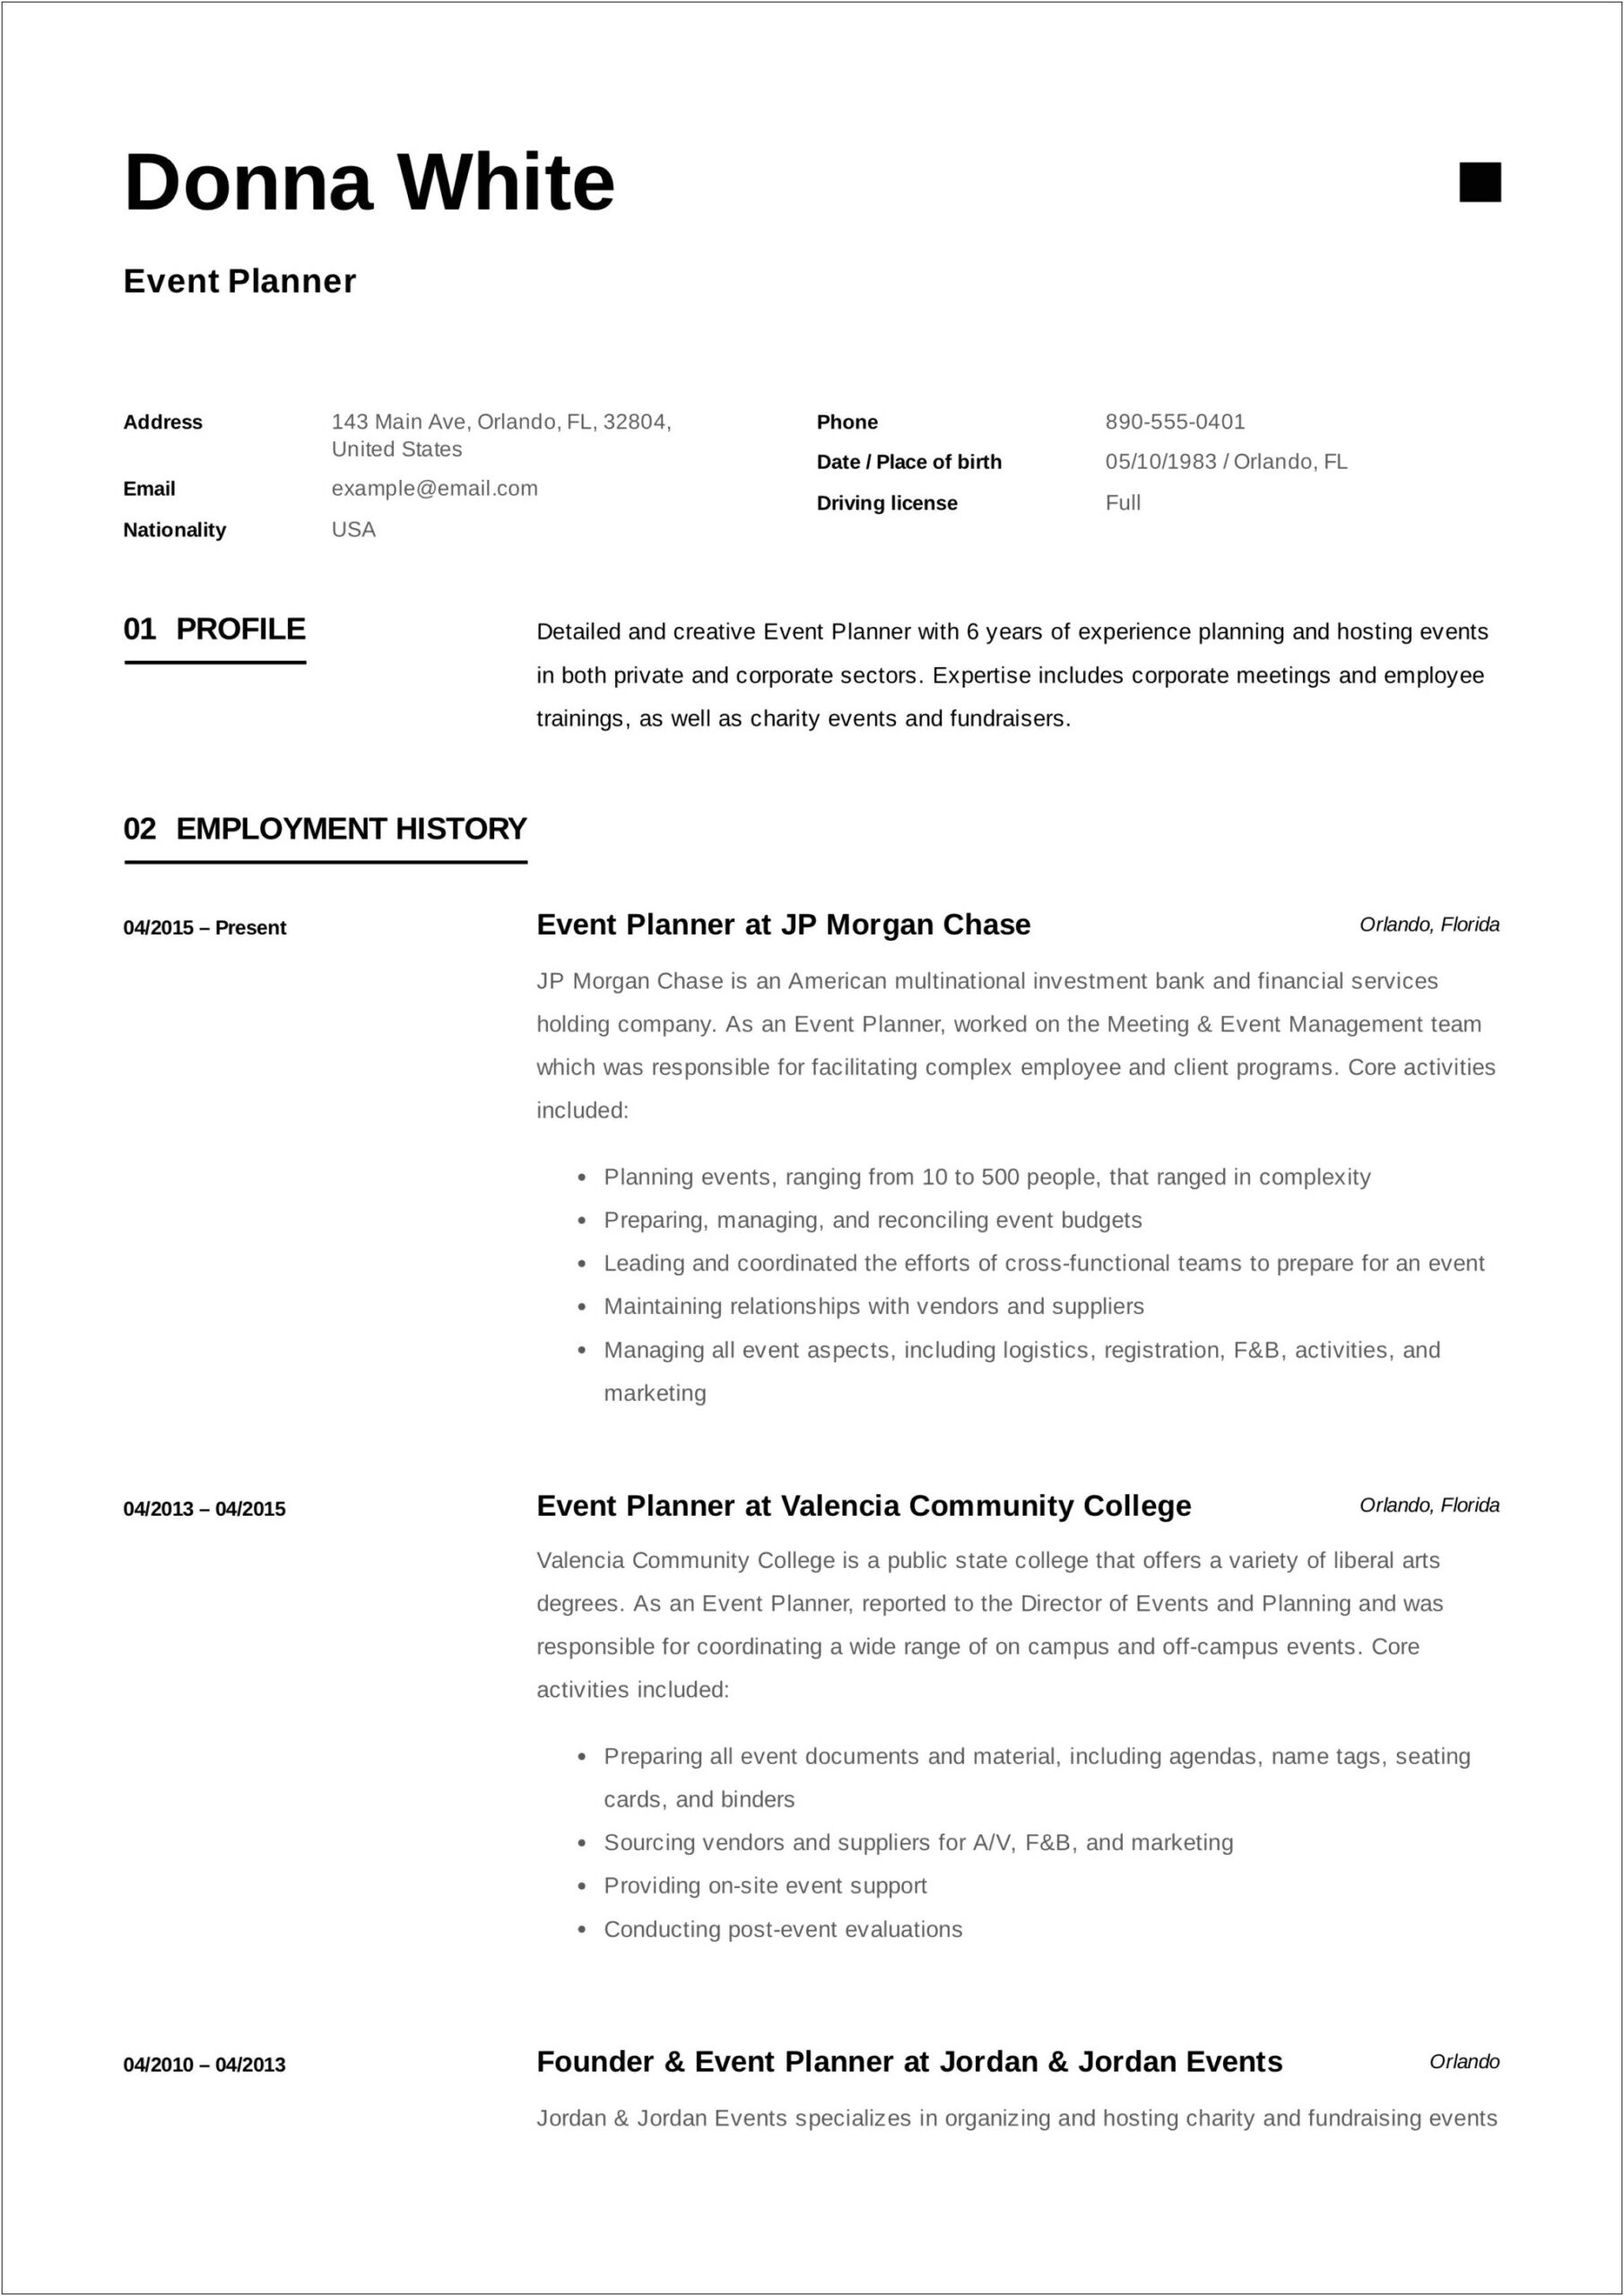 Resume Objectives For Event Planners